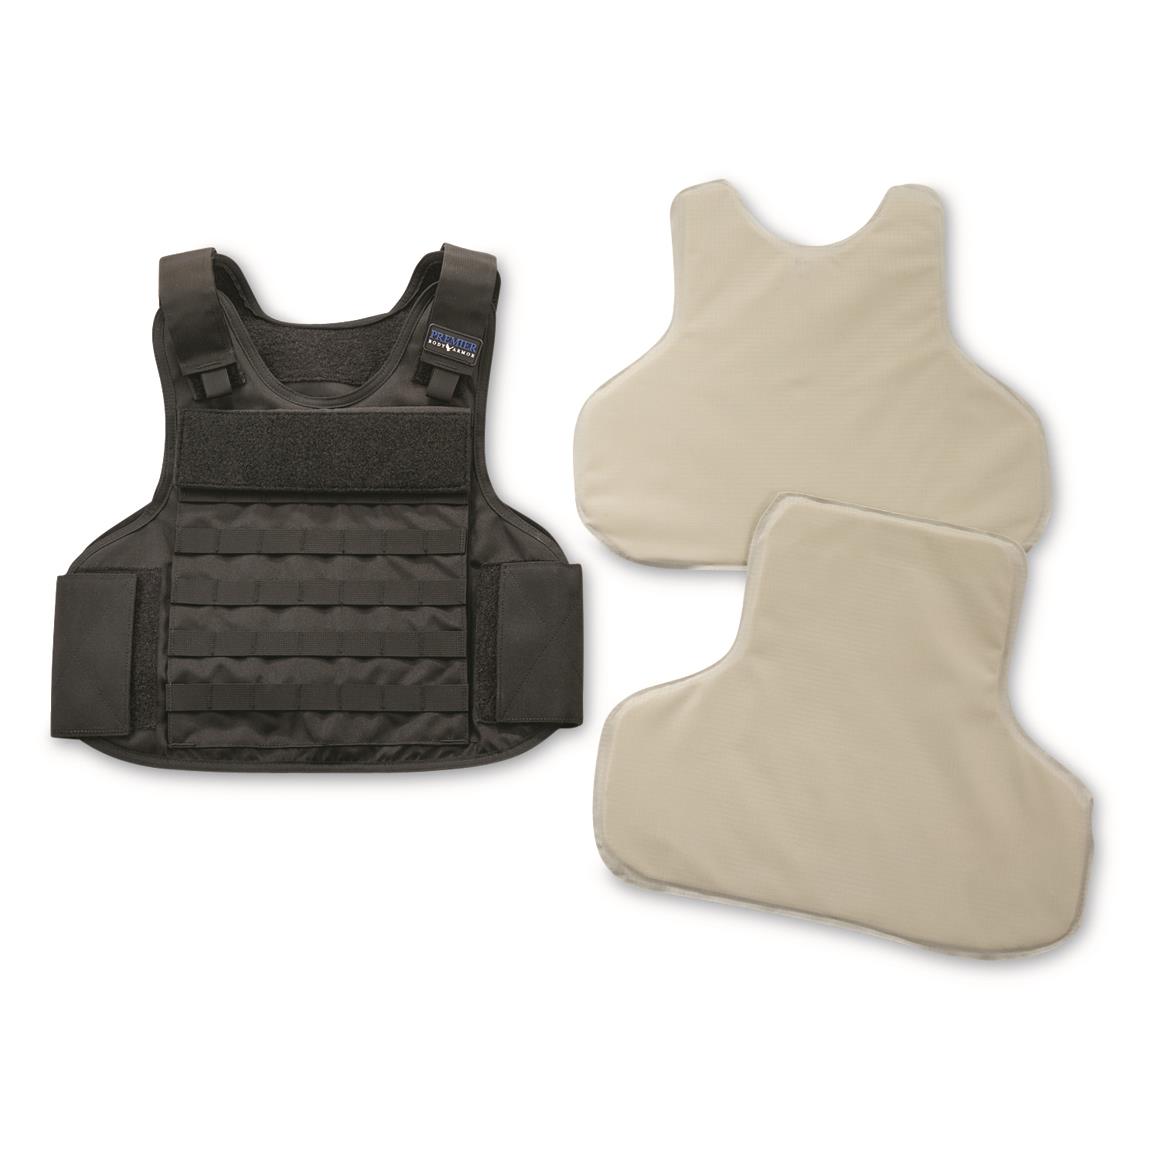 Premier Hybrid Tactical Armor Carrier Vest with (2) Level IIIA 10x12